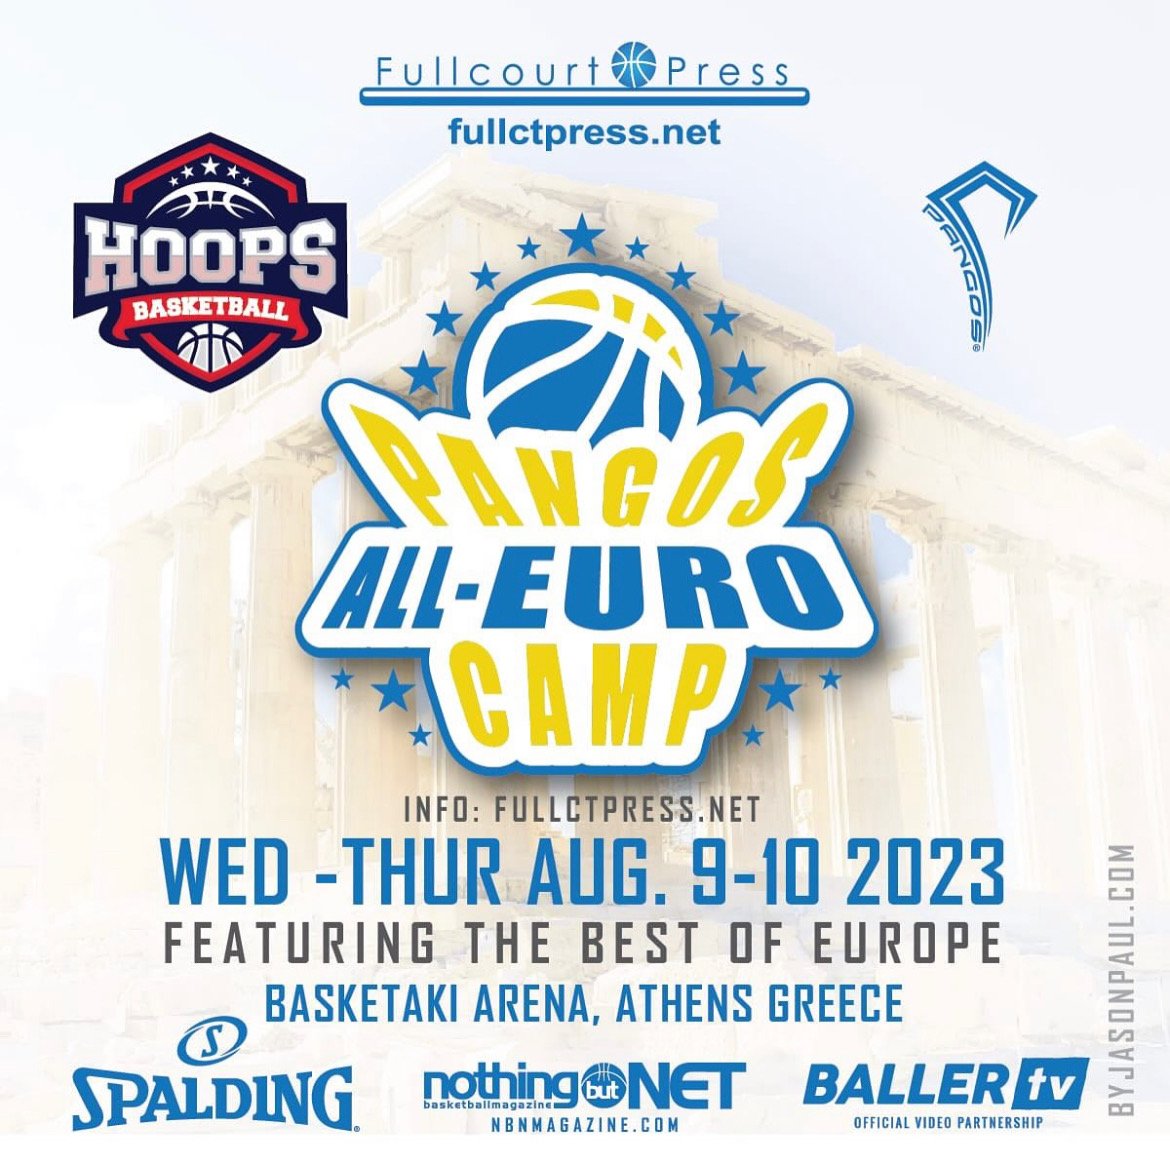 Journey of a 1000 miles starts with a single step. Looking forward to 1st Pangos All-Euro Camp on Aug 9-10 @ Basketaki Arena (Athens Greece). Expecting players from all over Europe with @FrankieBur @RonMFlores @nbadraftnet & @NBNMagazine on hand. Live-streamed on @BallerTV